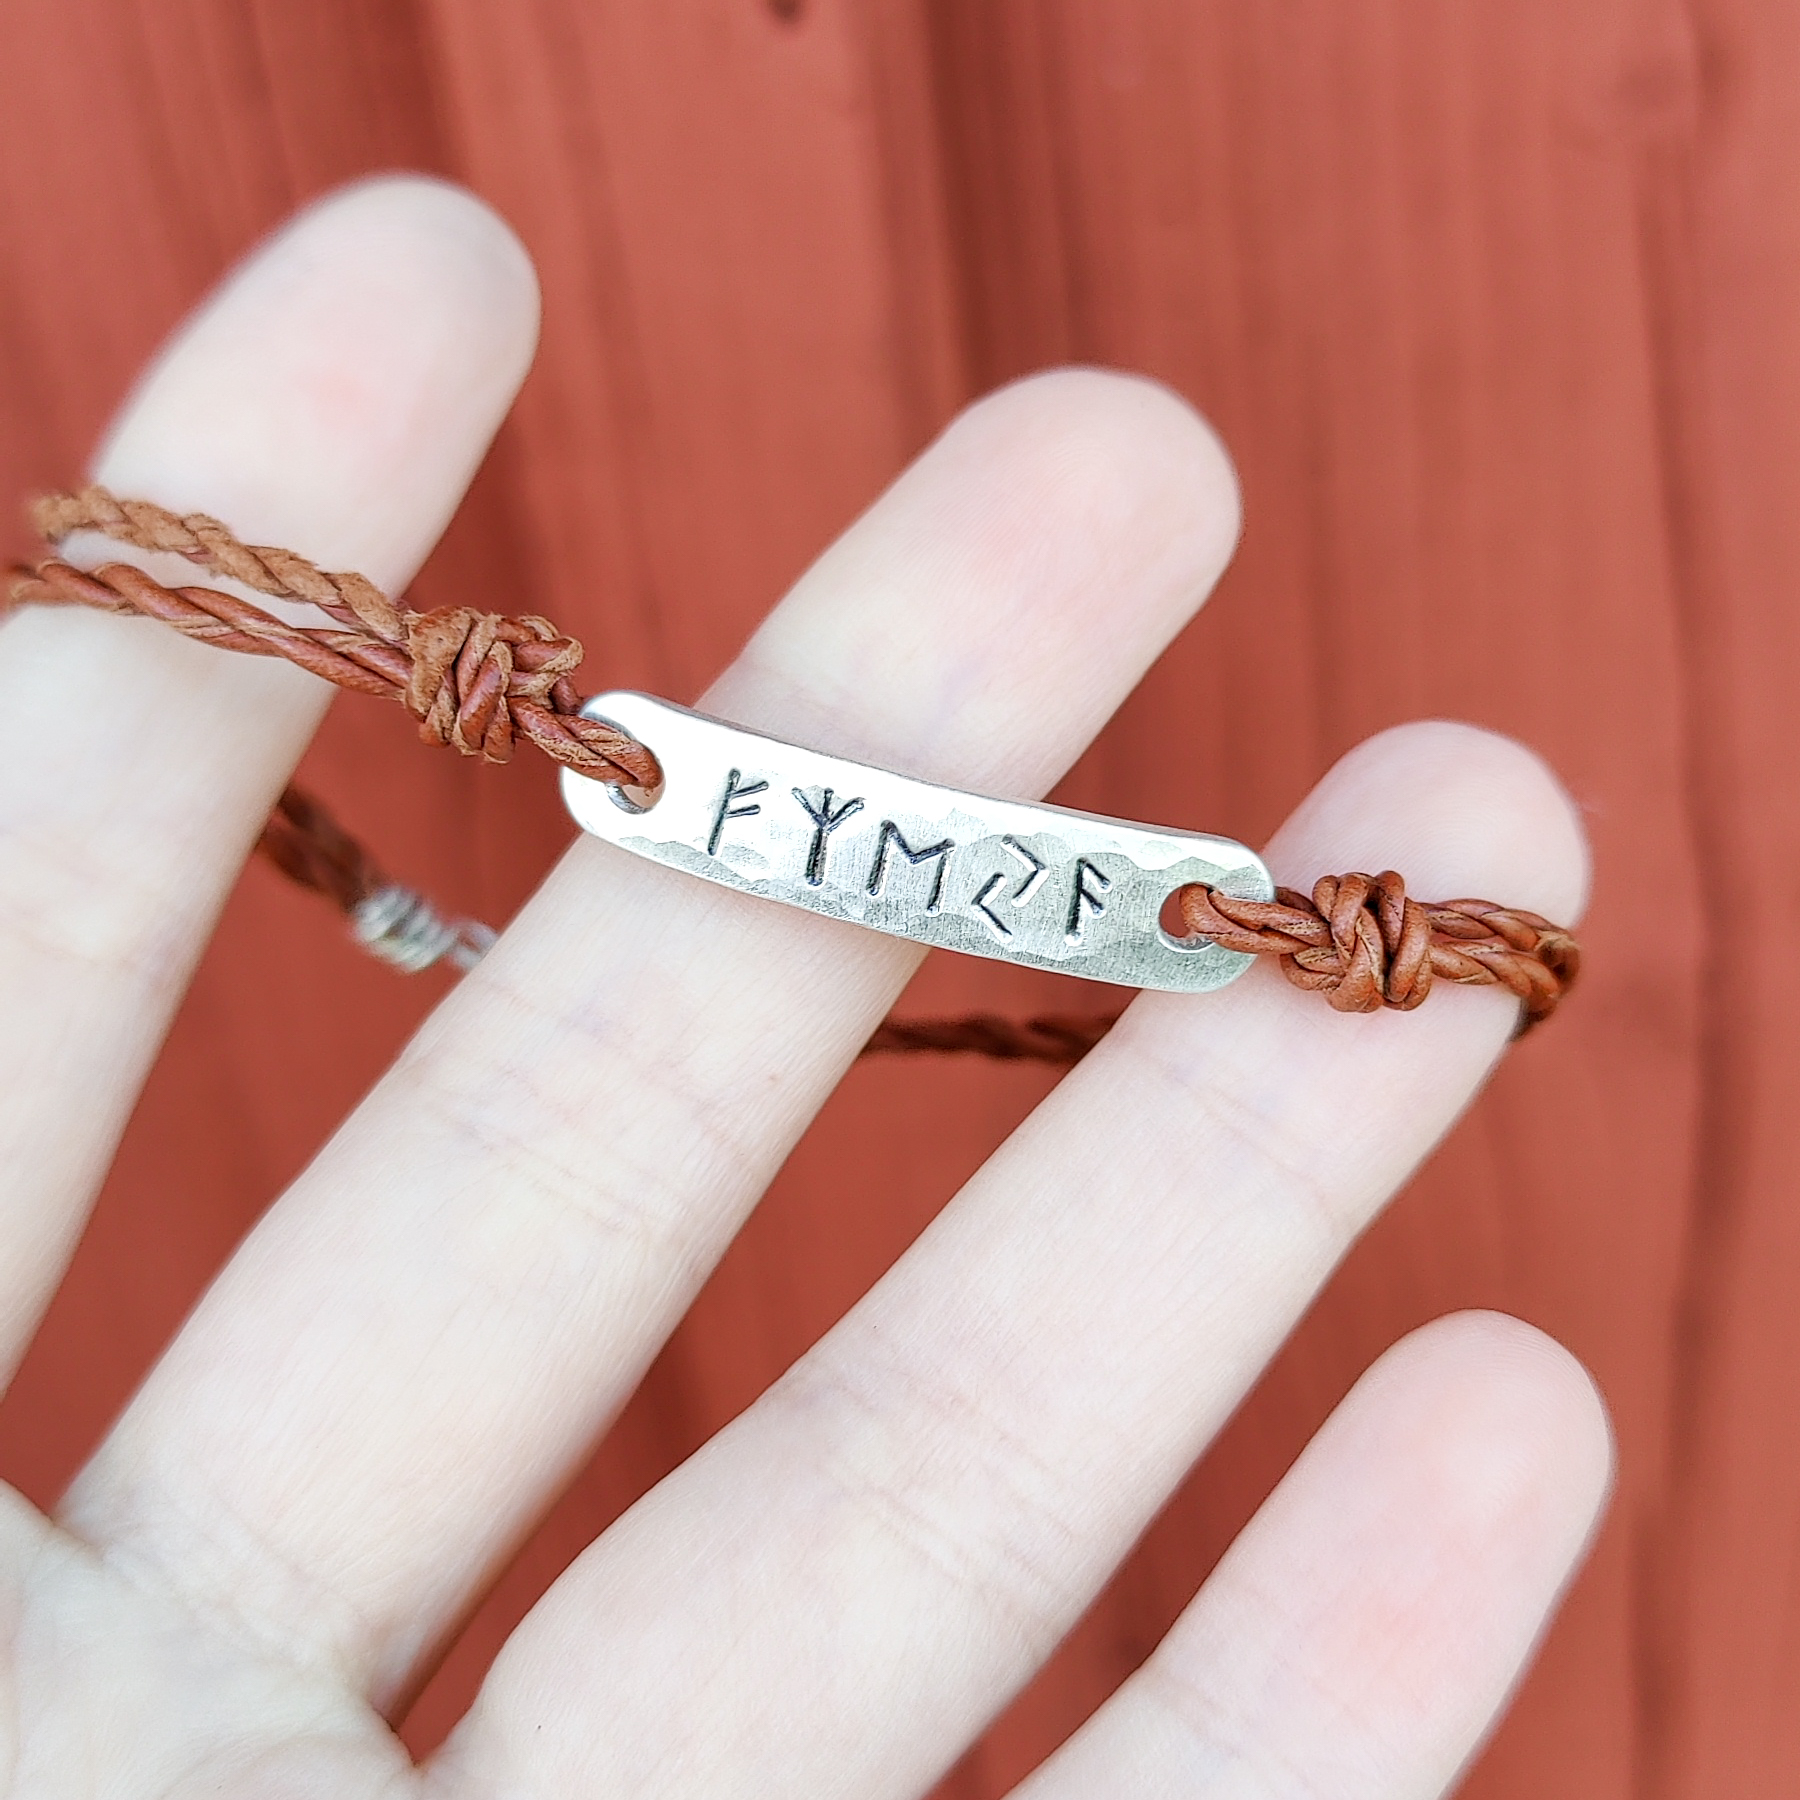 Bracelet Runes Leather Recycled Sterling Silver